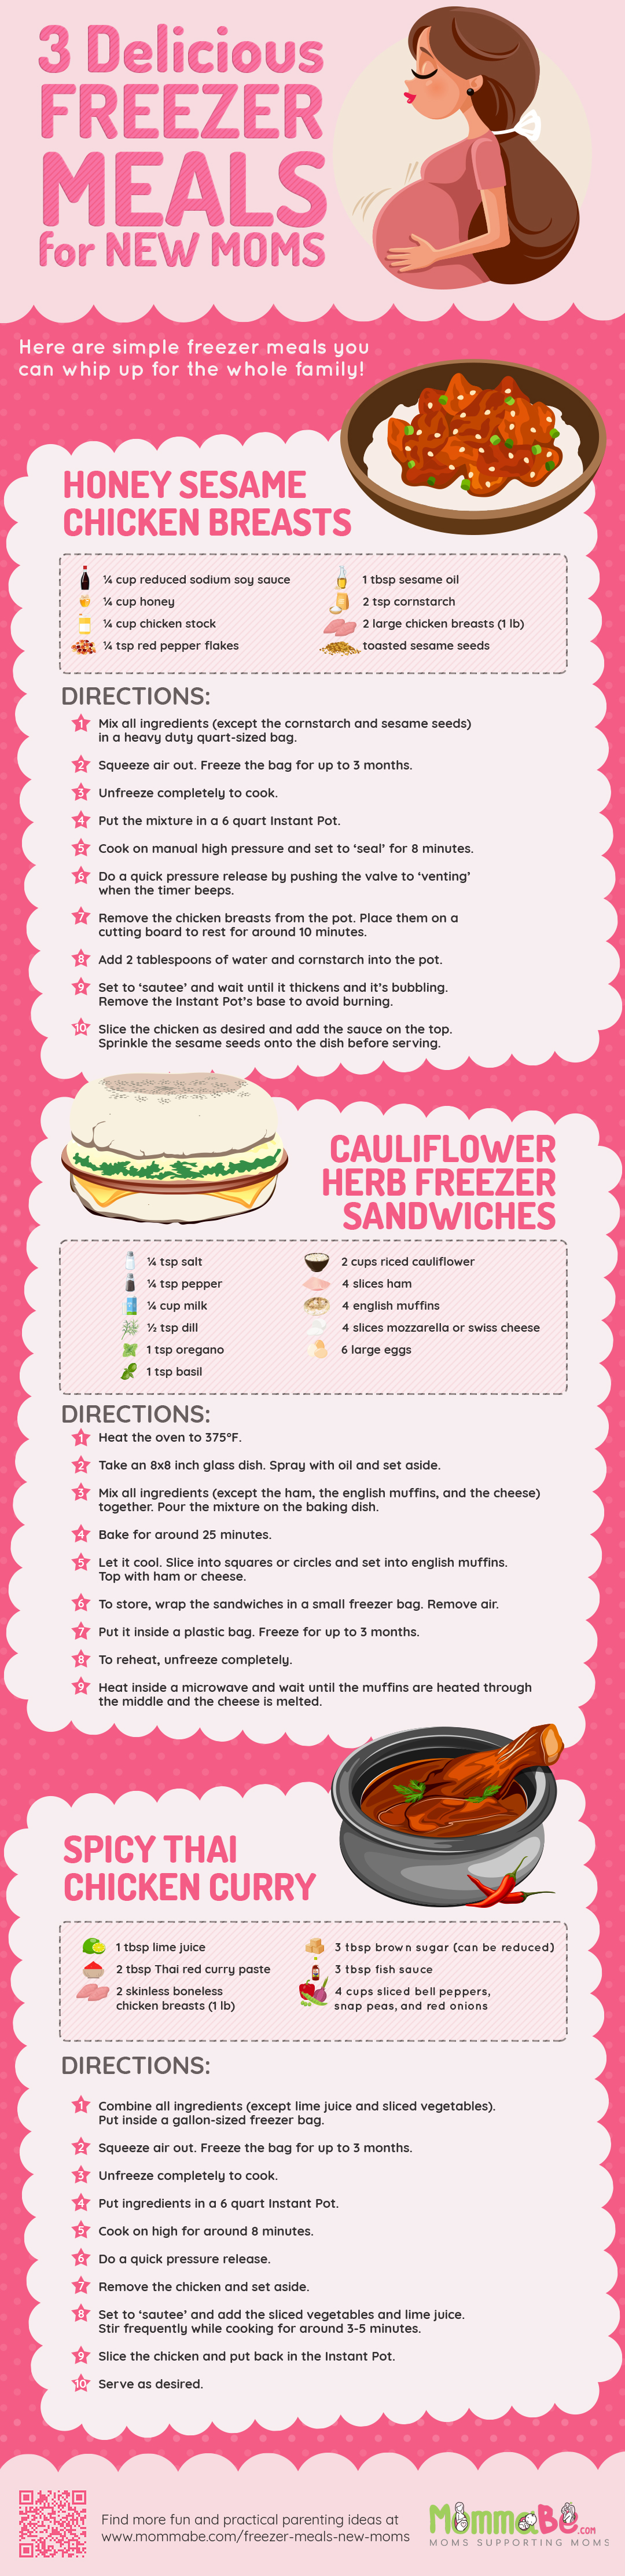 infographic | 3 Delicious Freezer Meals For New Moms!